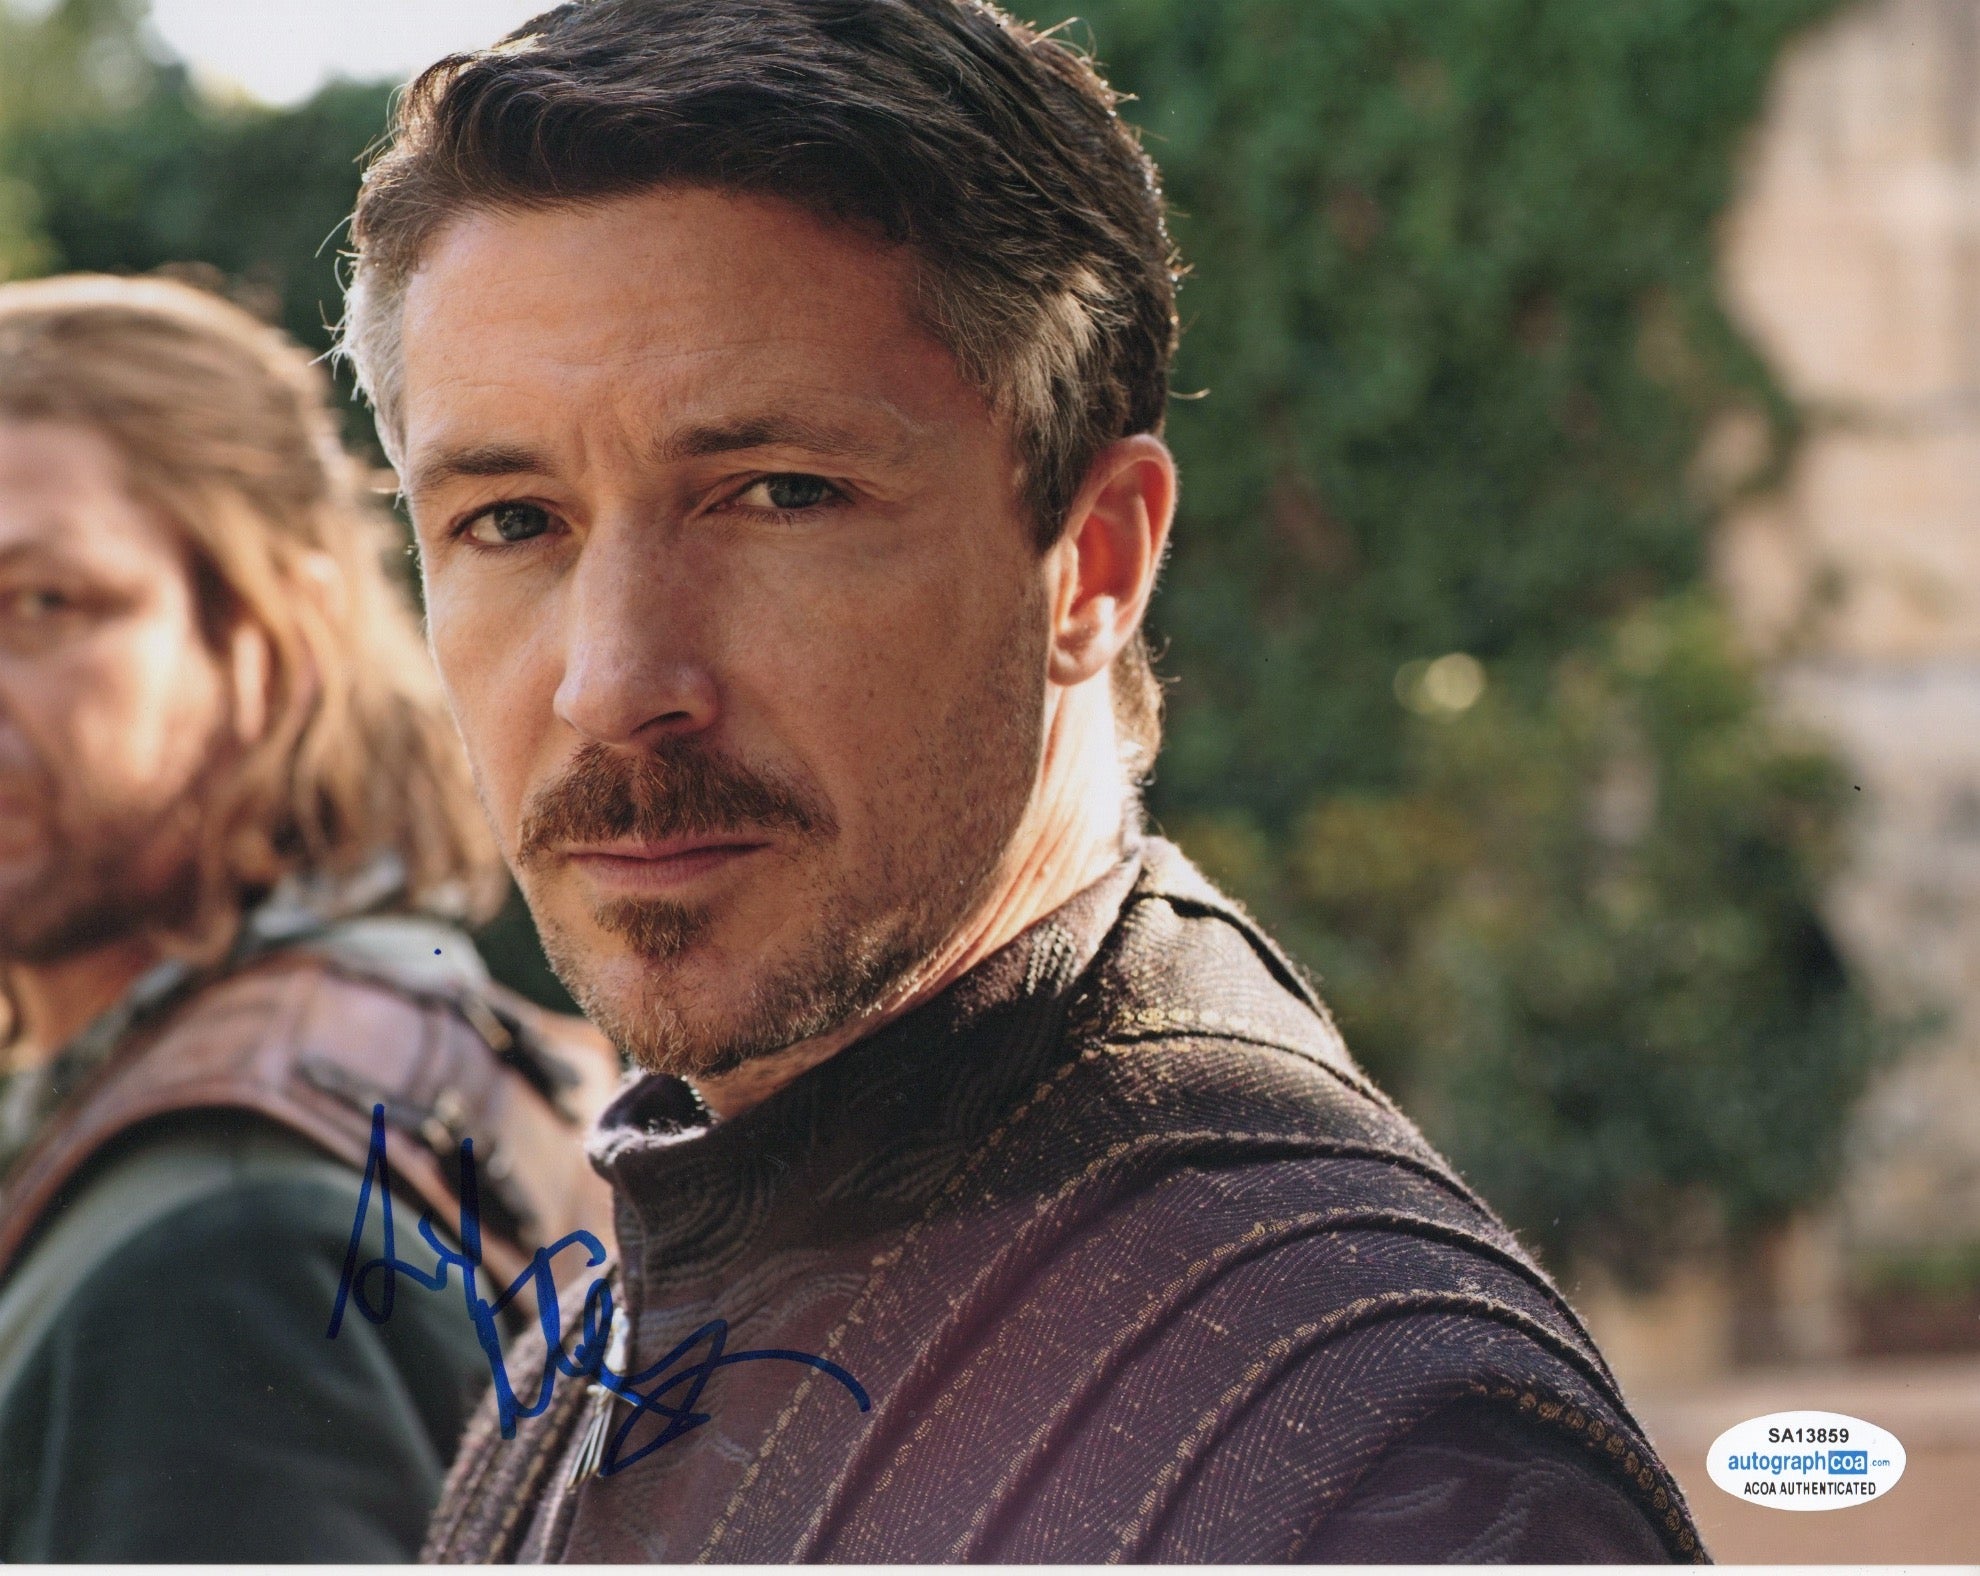 Aidan Gillen Game of Thrones Signed Autograph 8x10 Photo ACOA #6 - Outlaw Hobbies Authentic Autographs